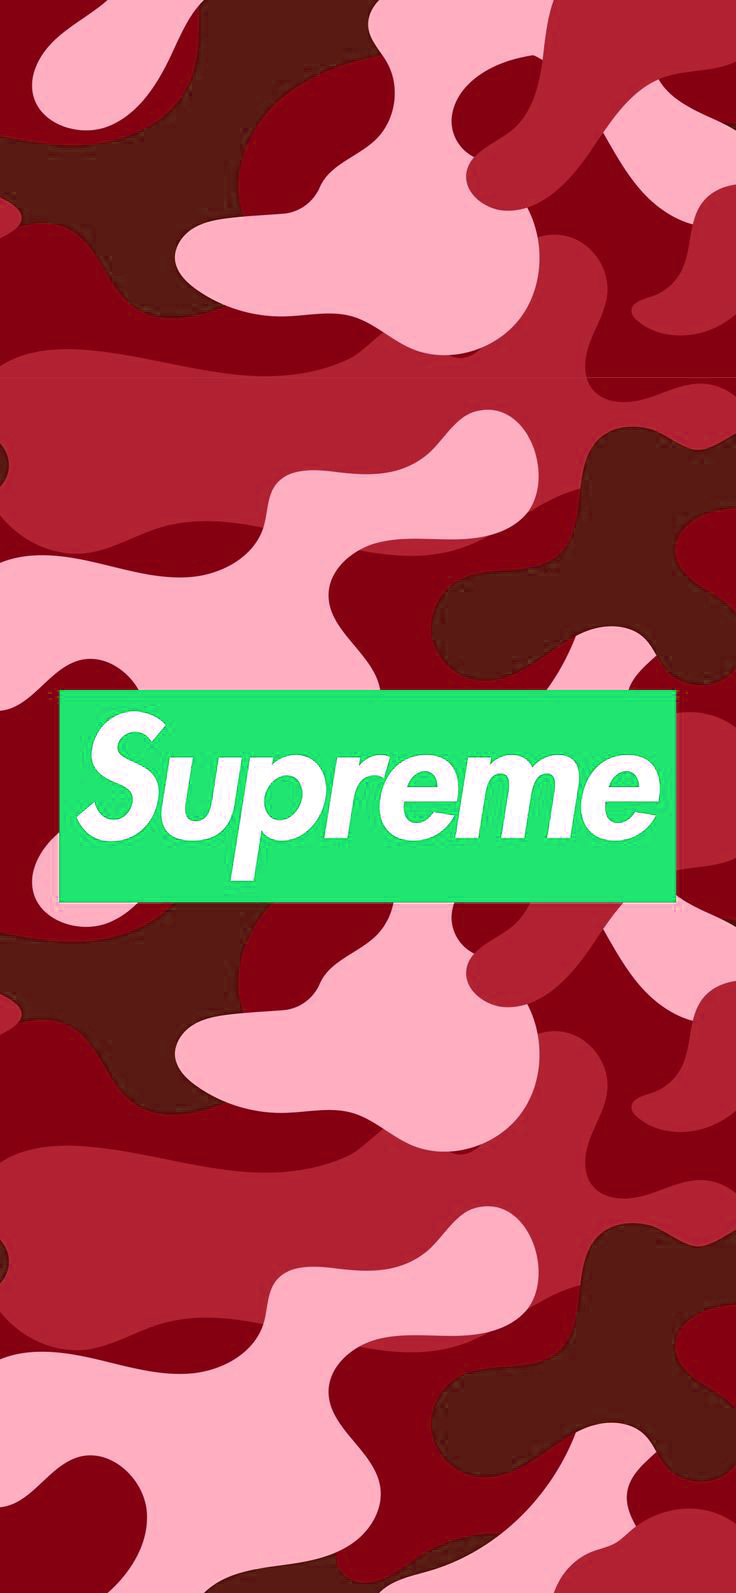 Supreme x Louis Vuitton Red Wallpapers for iPhone - Wallpapers